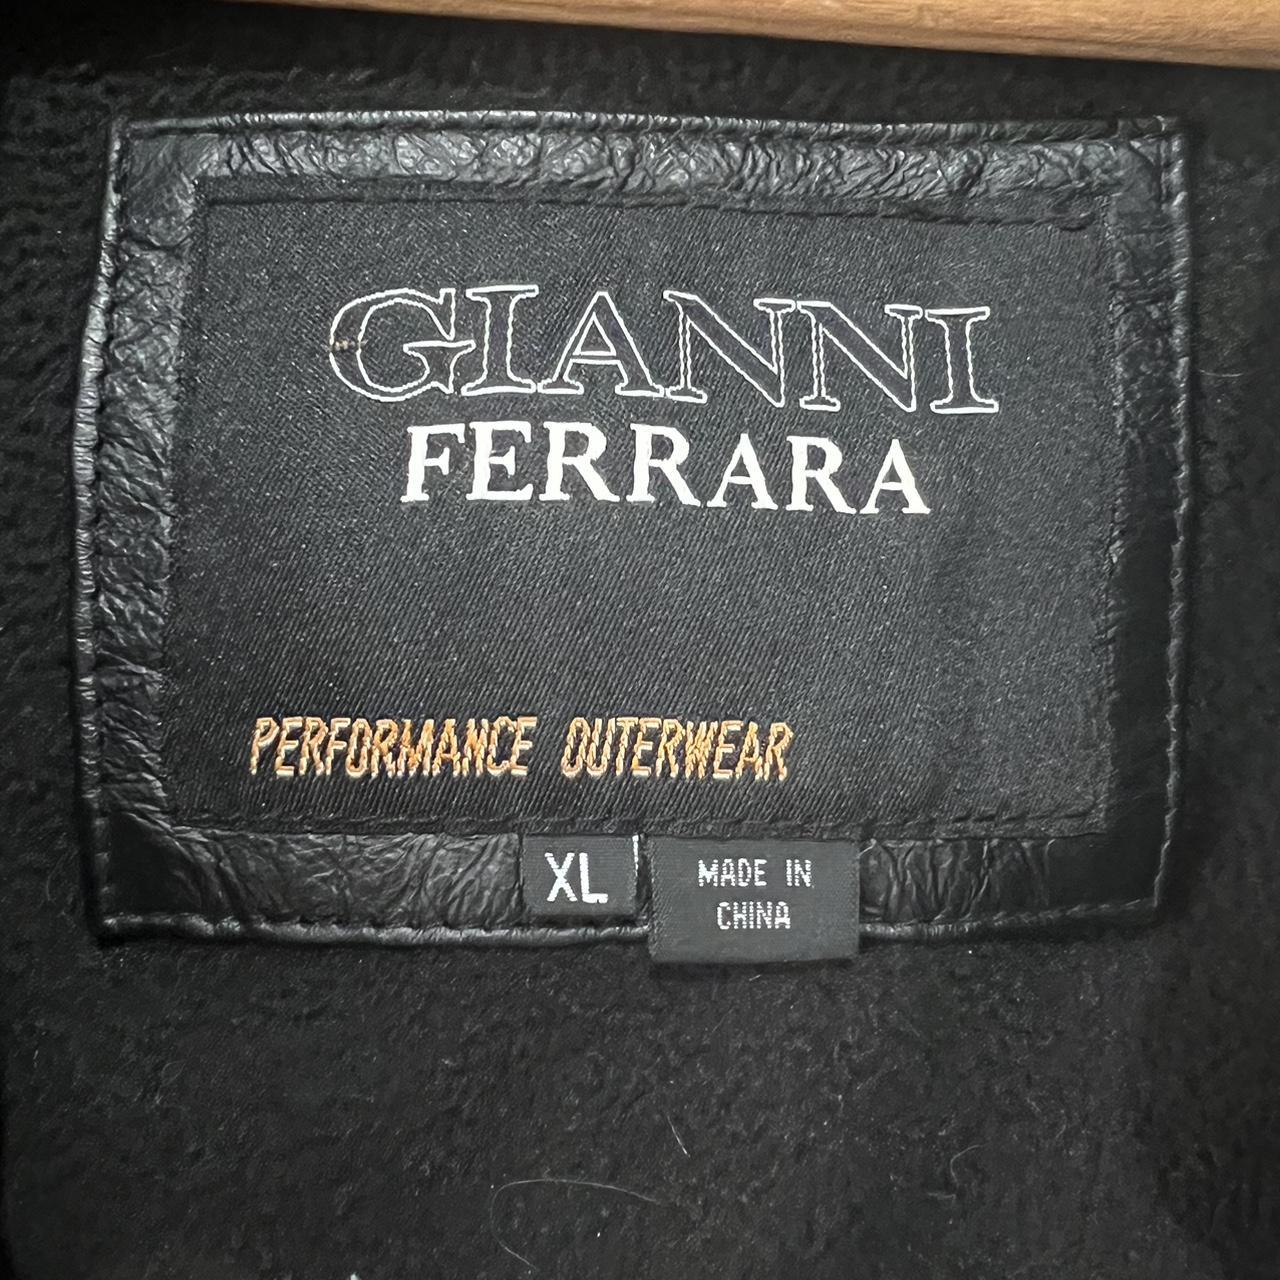 This vintage Gianni Ferrara leather jacket is the... - Depop